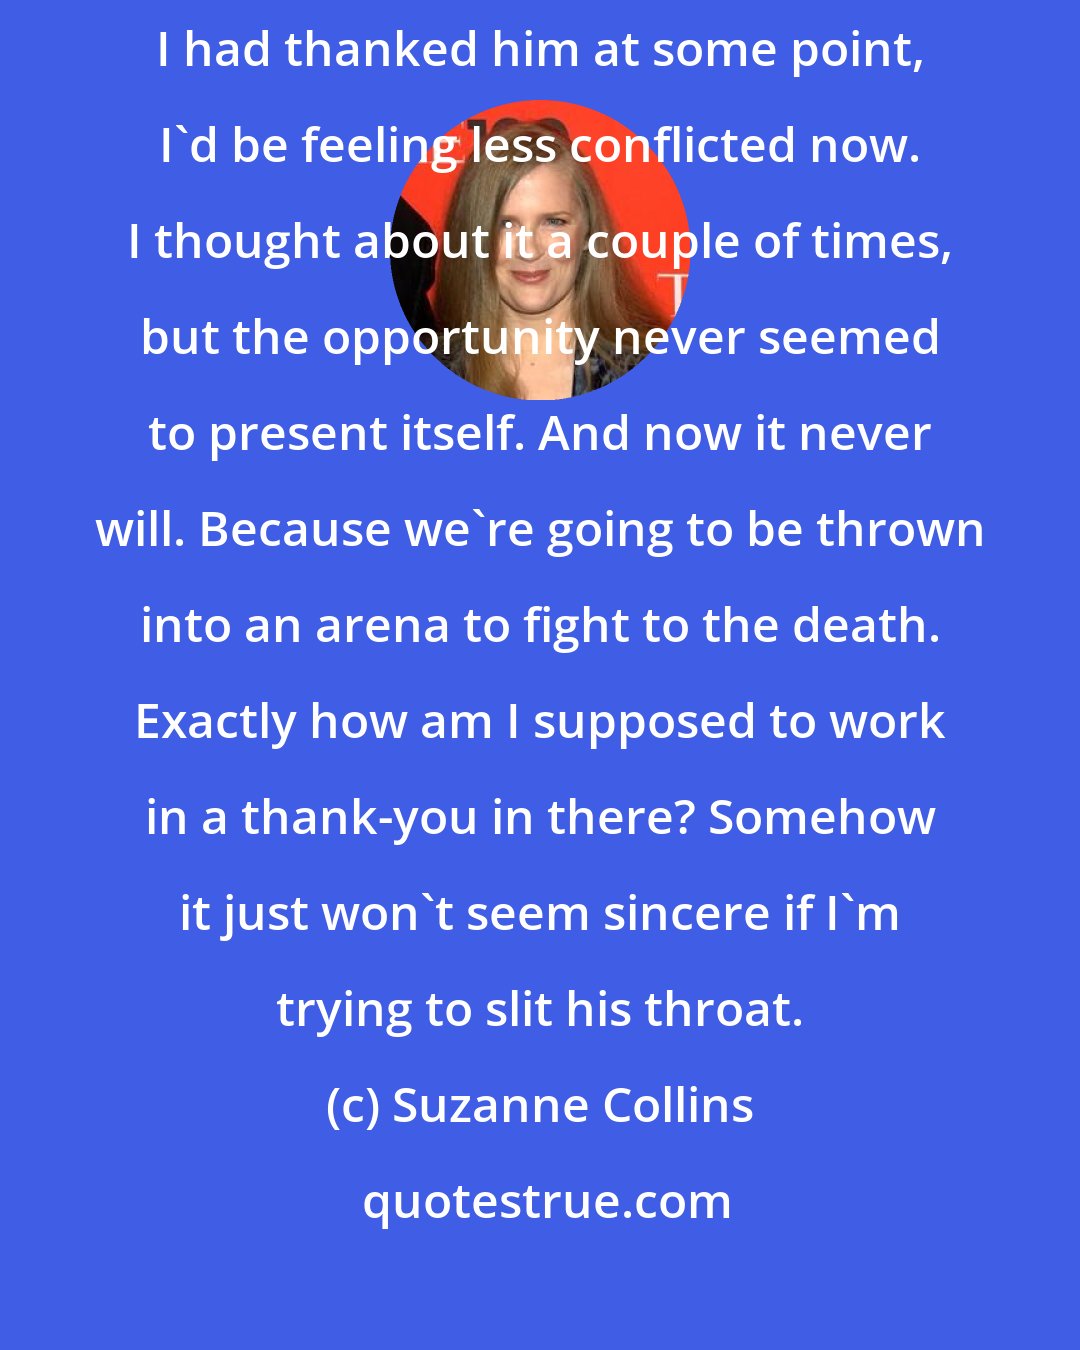 Suzanne Collins: I feel like I owe him something, and I hate owing people. Maybe if I had thanked him at some point, I'd be feeling less conflicted now. I thought about it a couple of times, but the opportunity never seemed to present itself. And now it never will. Because we're going to be thrown into an arena to fight to the death. Exactly how am I supposed to work in a thank-you in there? Somehow it just won't seem sincere if I'm trying to slit his throat.